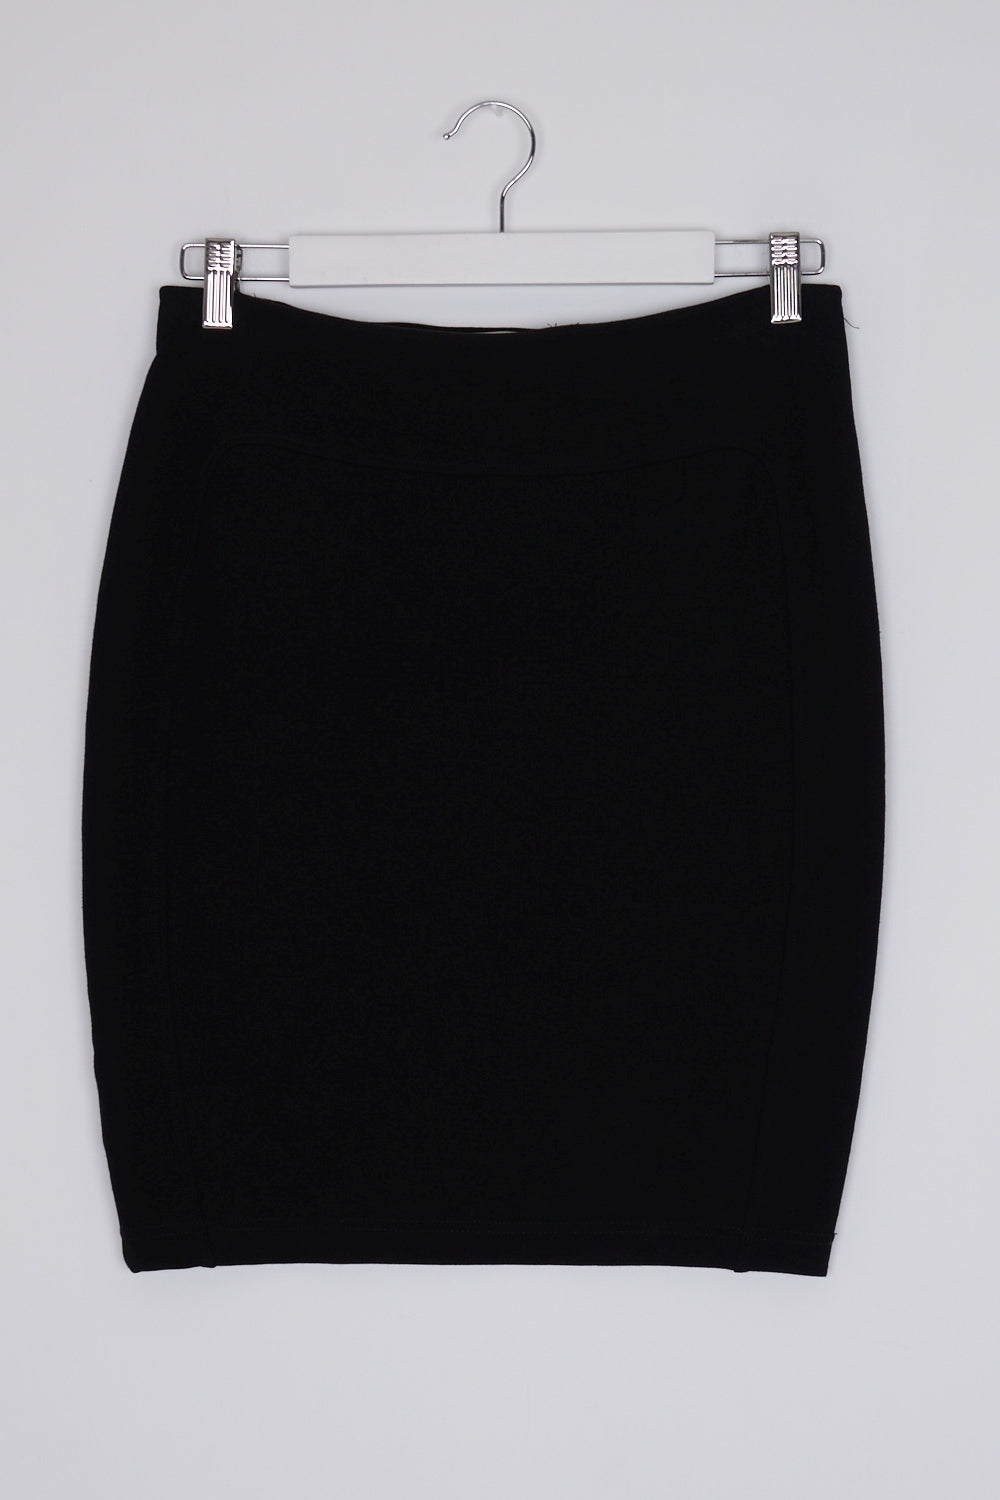 Country Road Black Bodycon Skirt XS